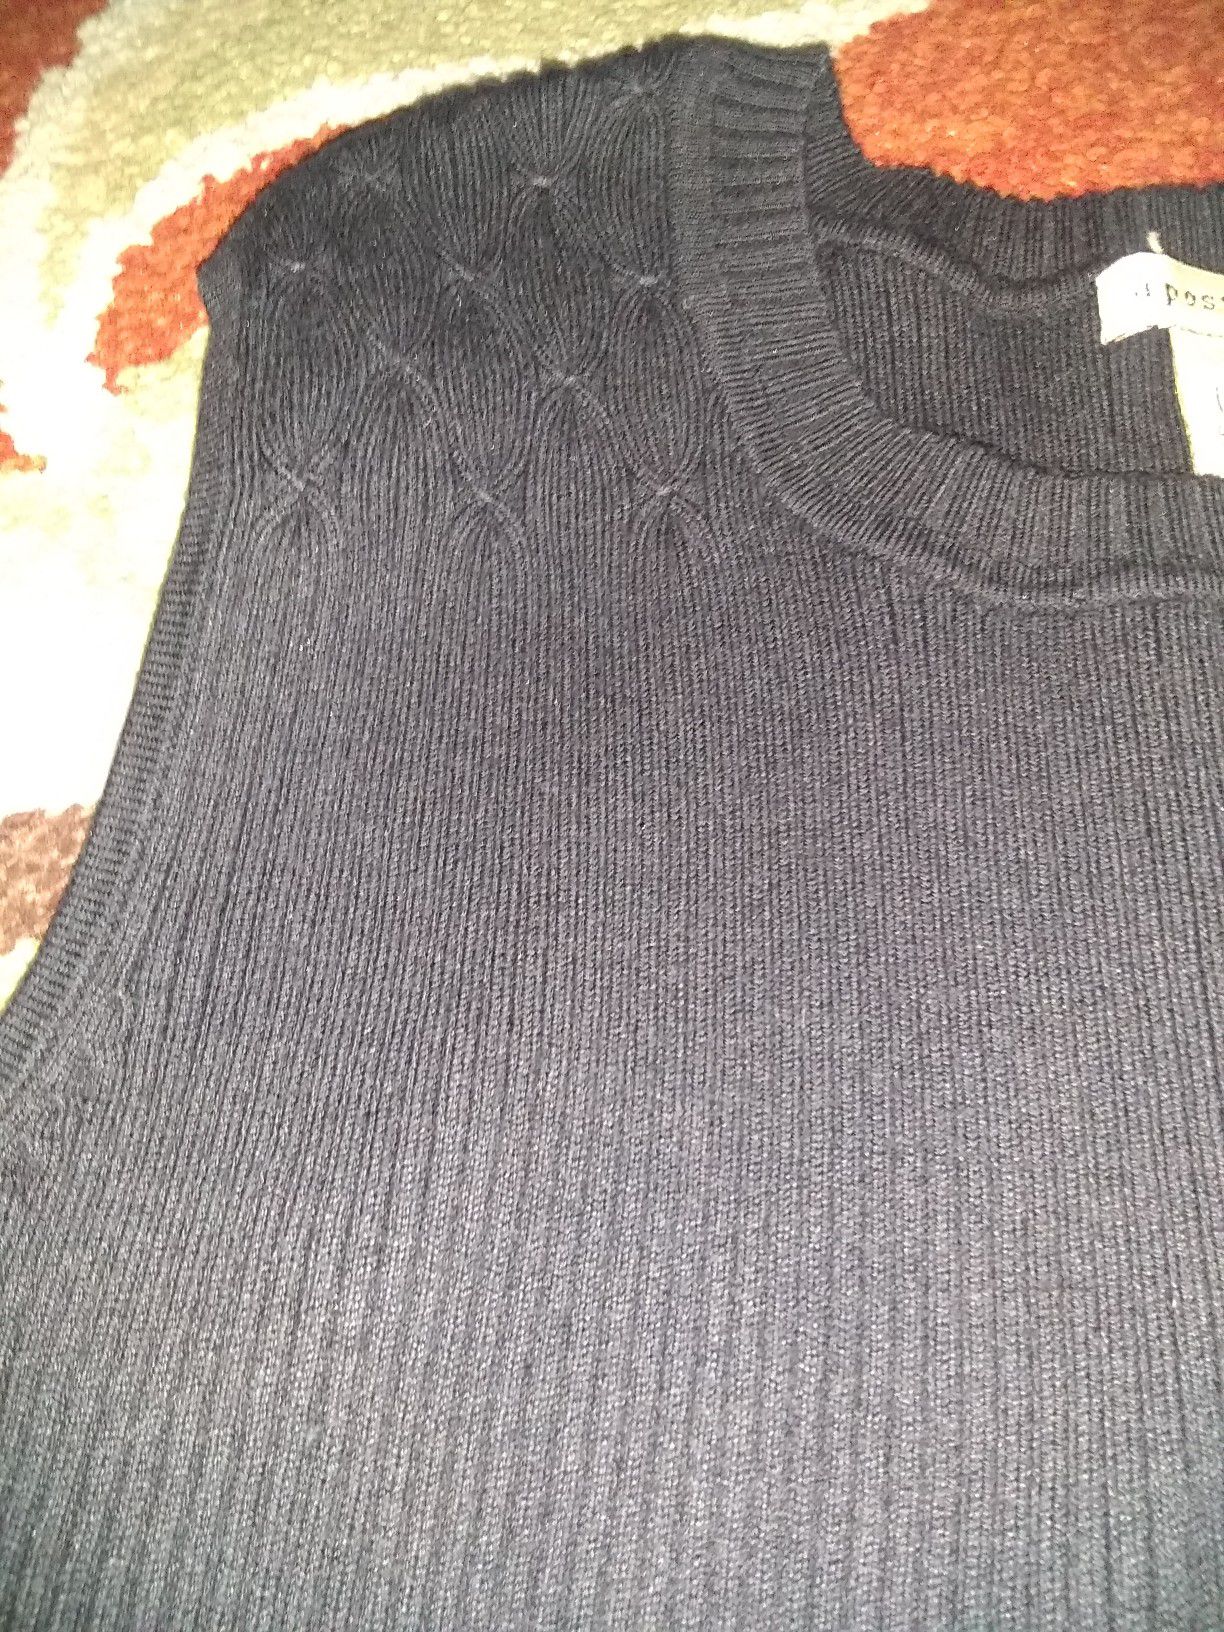 Apostrophe black knitted top